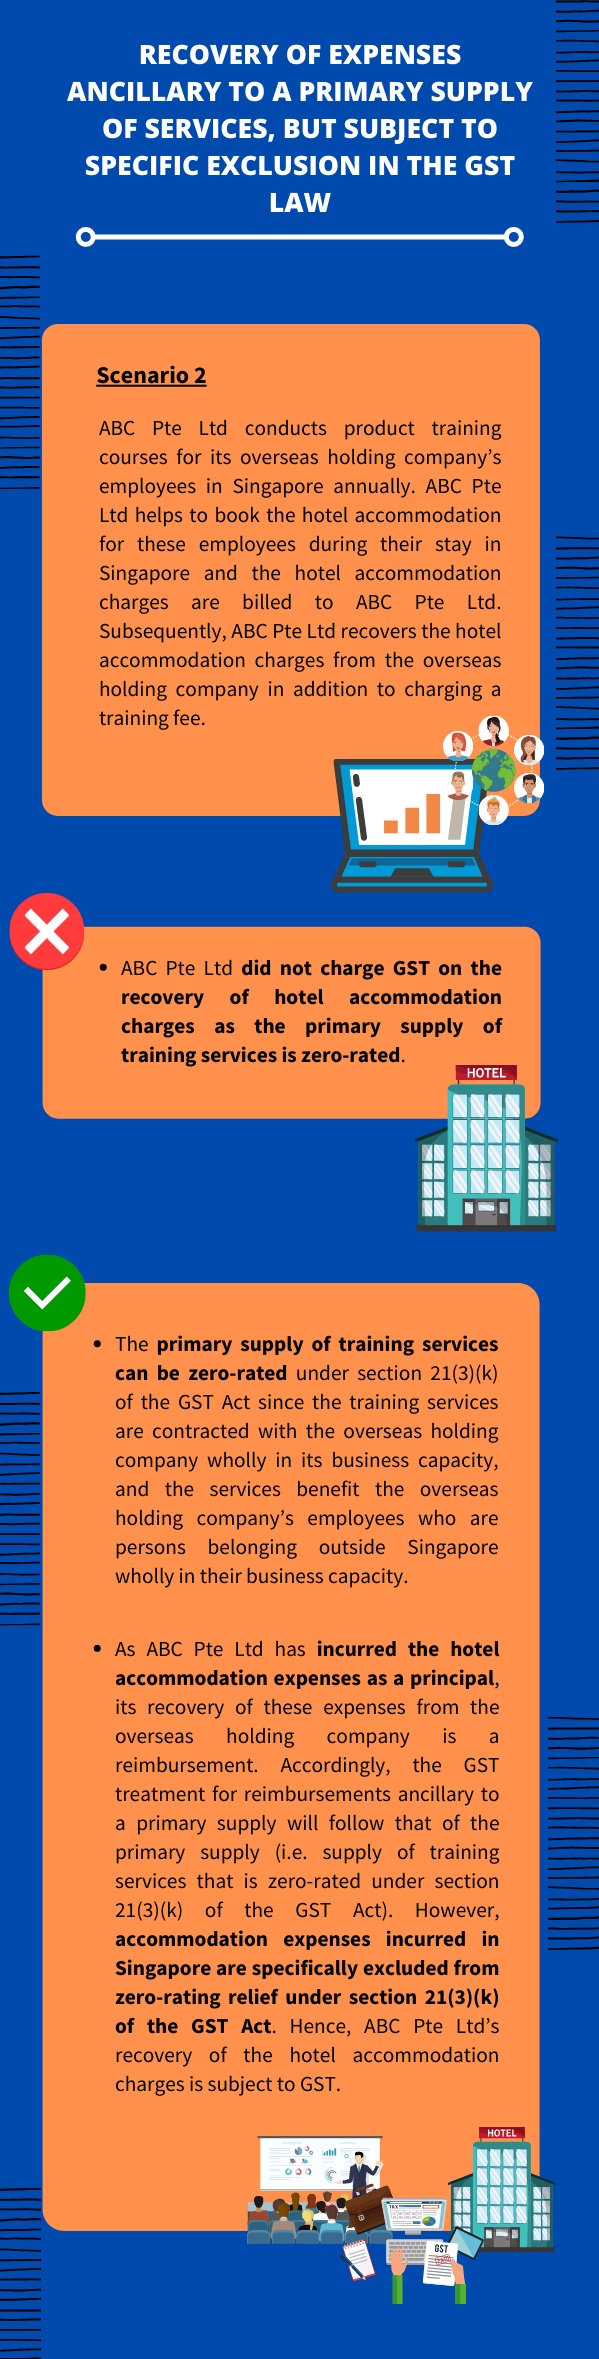 This infographic illustrates the recovery of expenses ancillary to a primary supply of services, but subject to specific exclusion in the GST Law